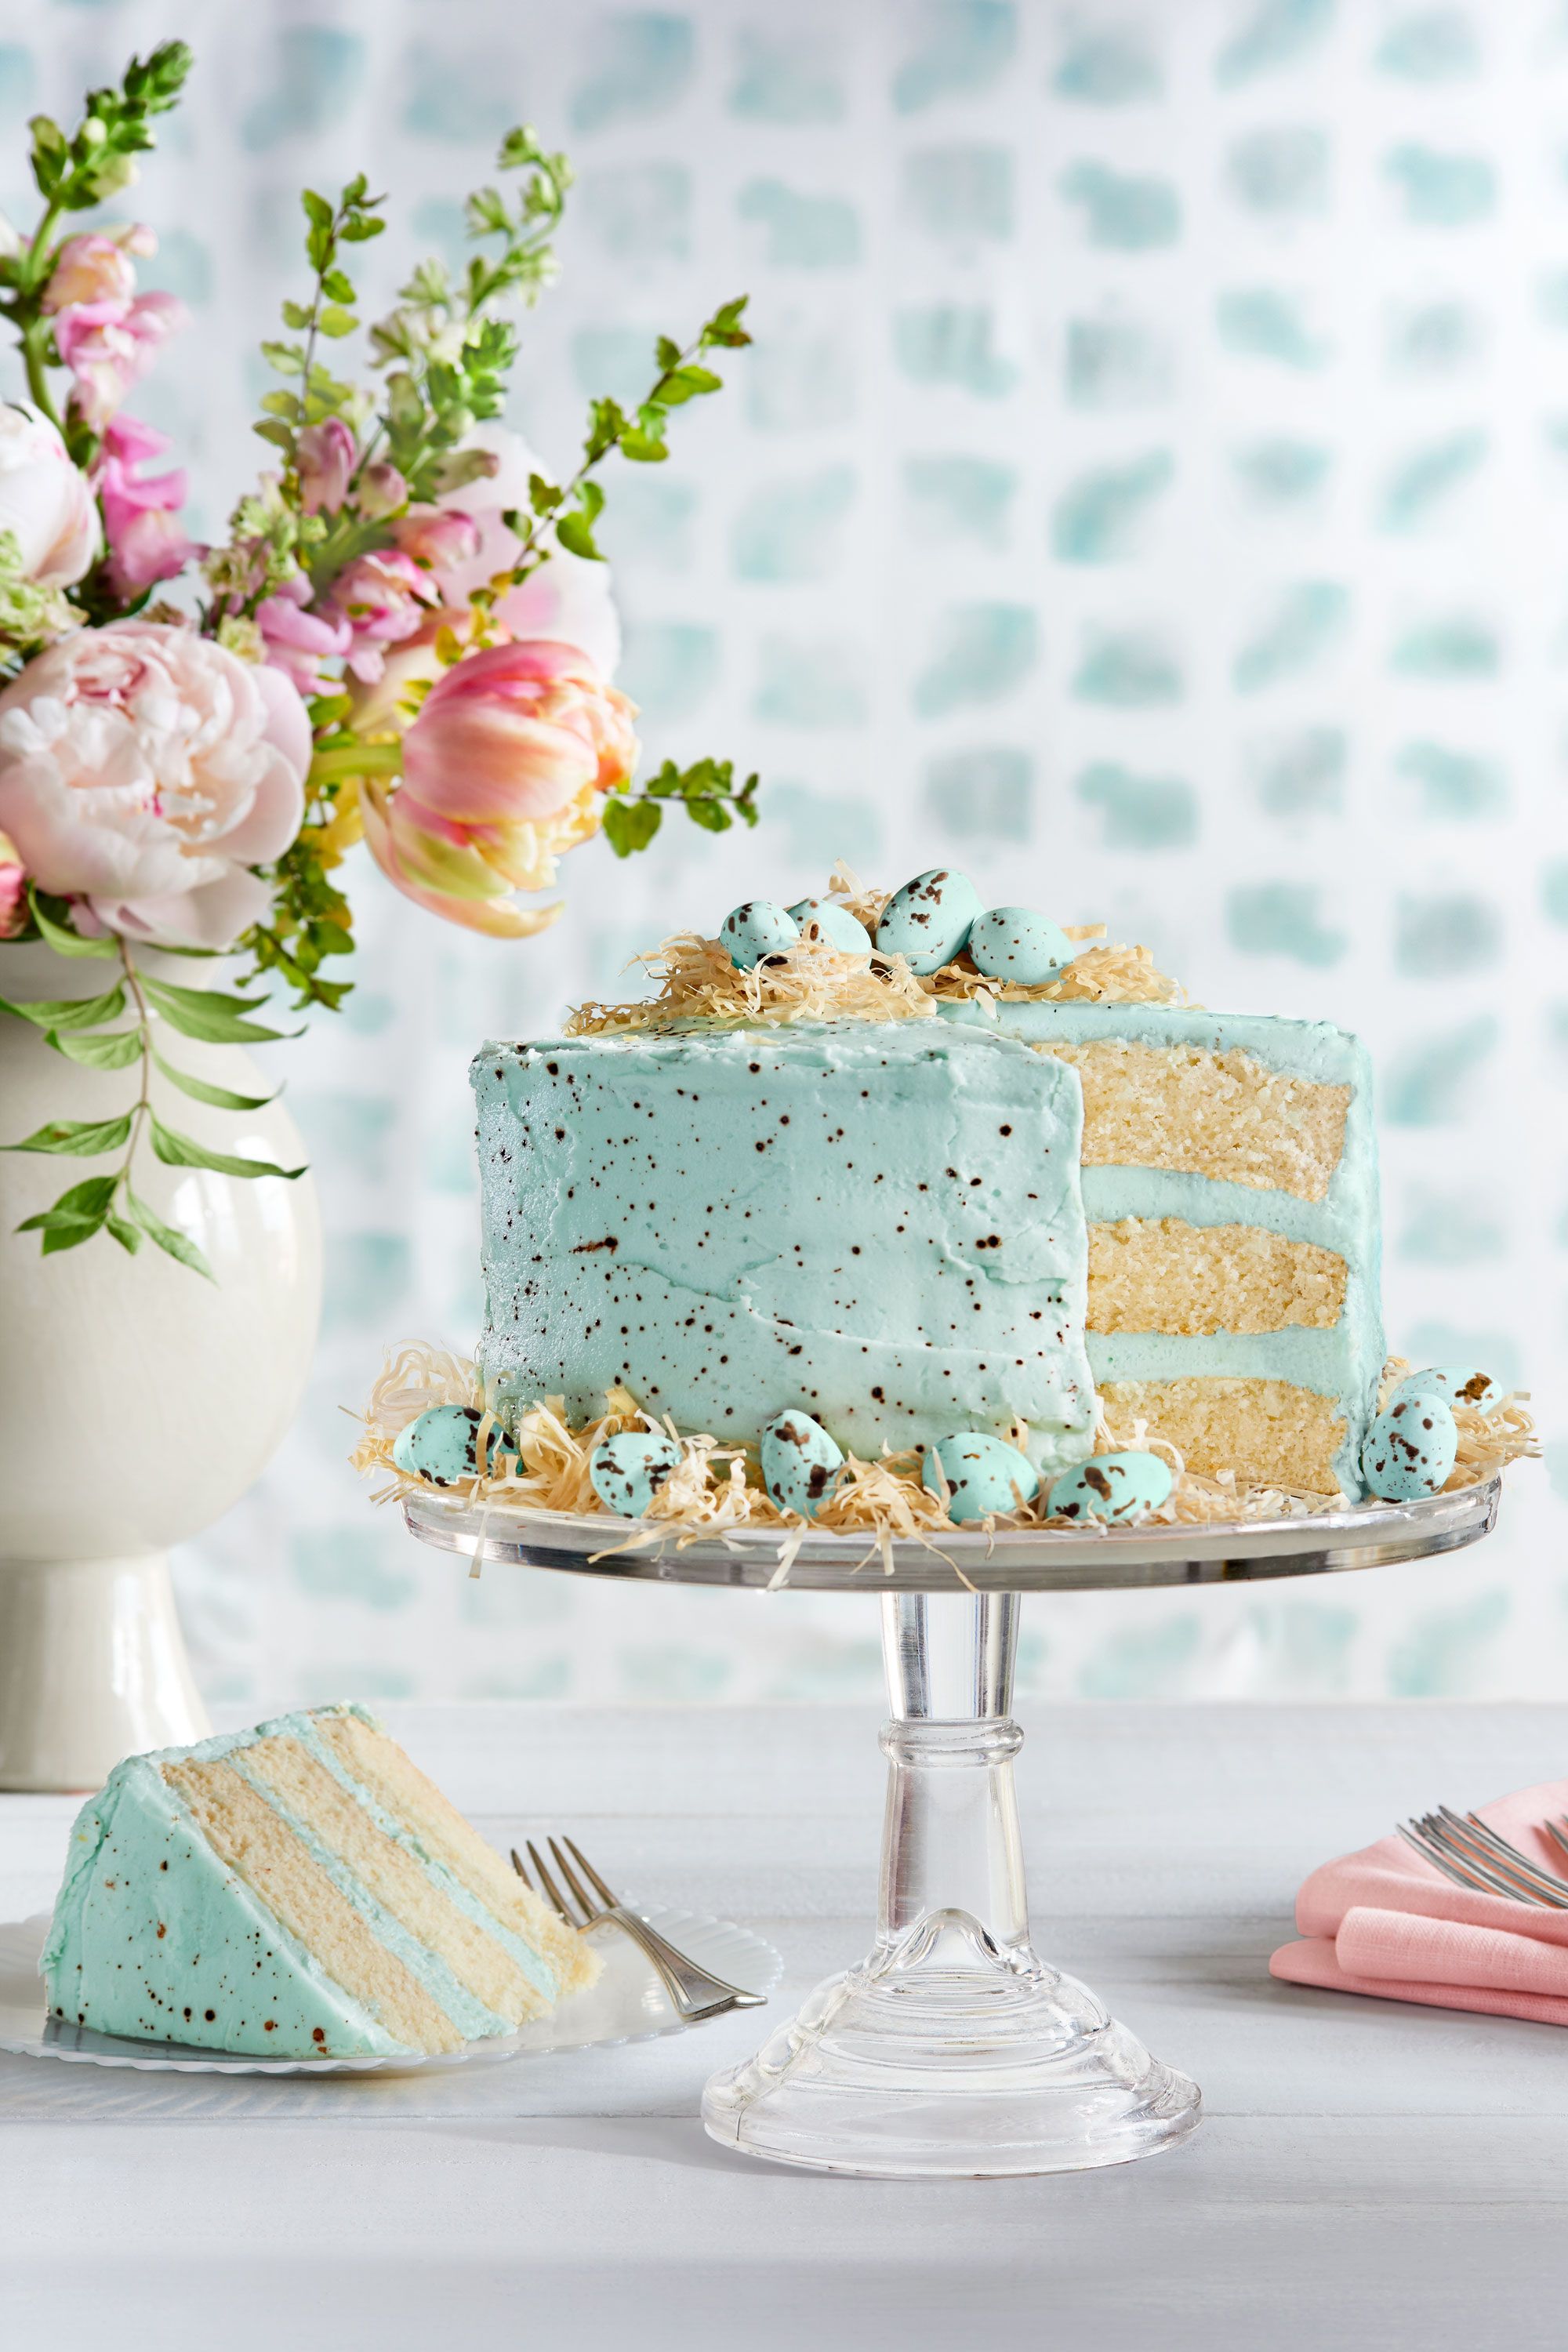 How to Decorate a Cake: 10 quick and easy DIY ideas